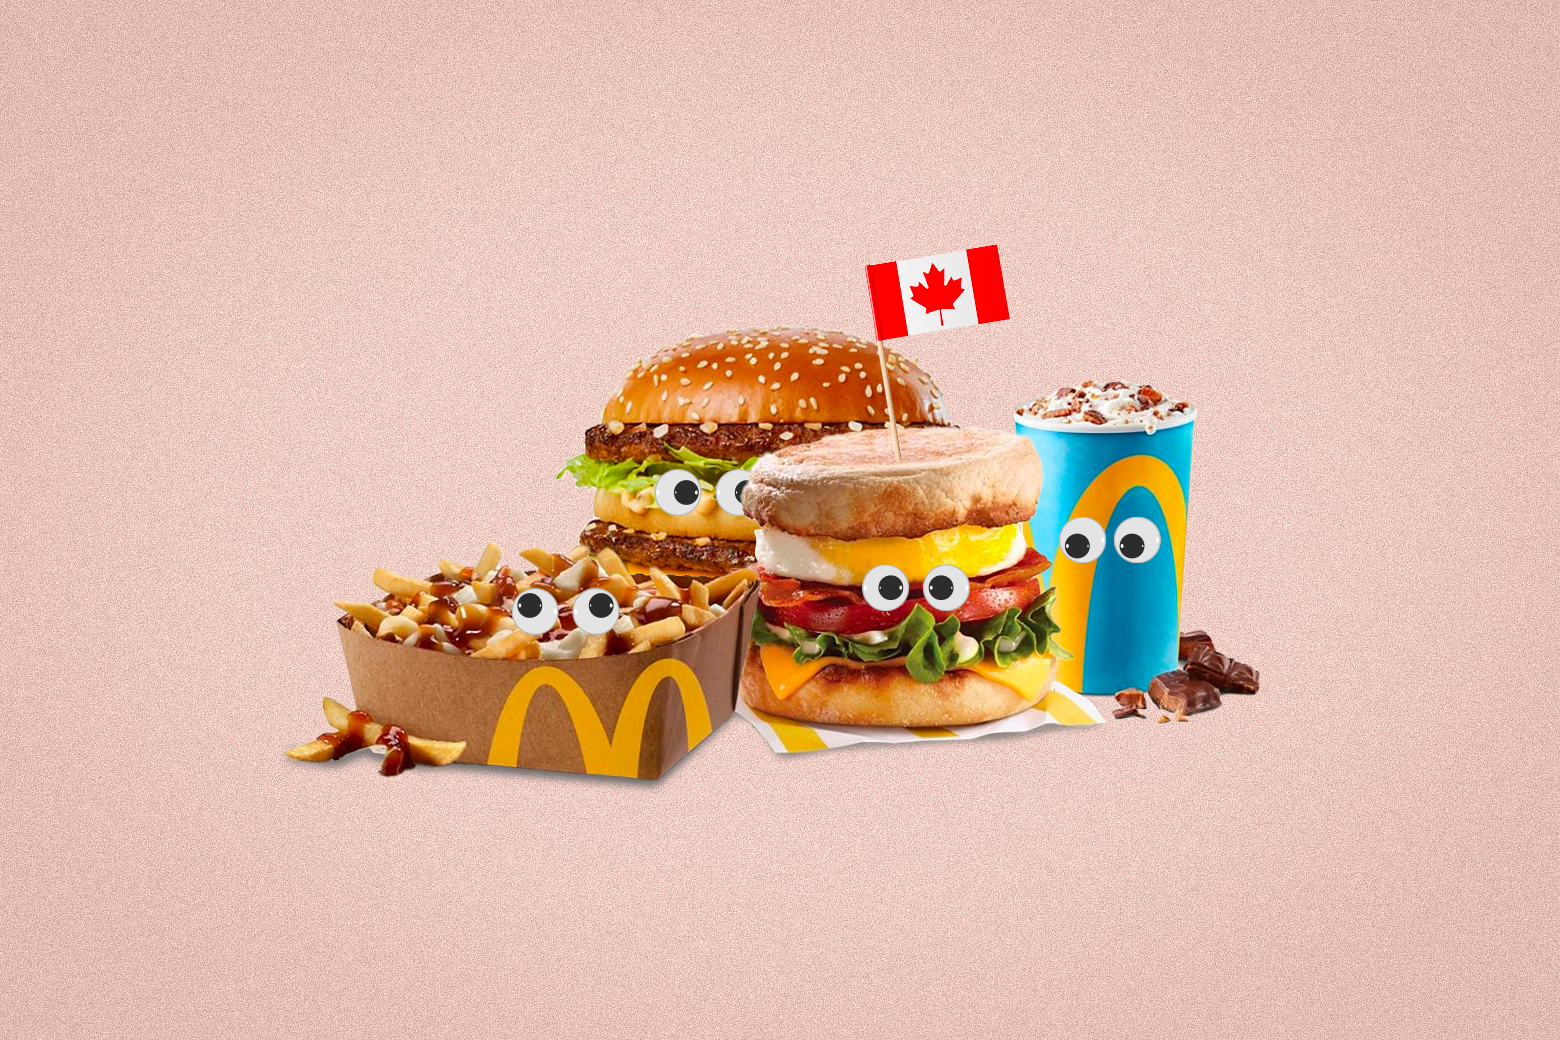 Canadian McDonald's items, including poutine, an Egg BLT McMuffin, a Skor McFlurry, and a massive Grand Mac, over a pastel pink background. All items are adorned with googly eyes, and a Canadian flag is planted atop the McMuffin.